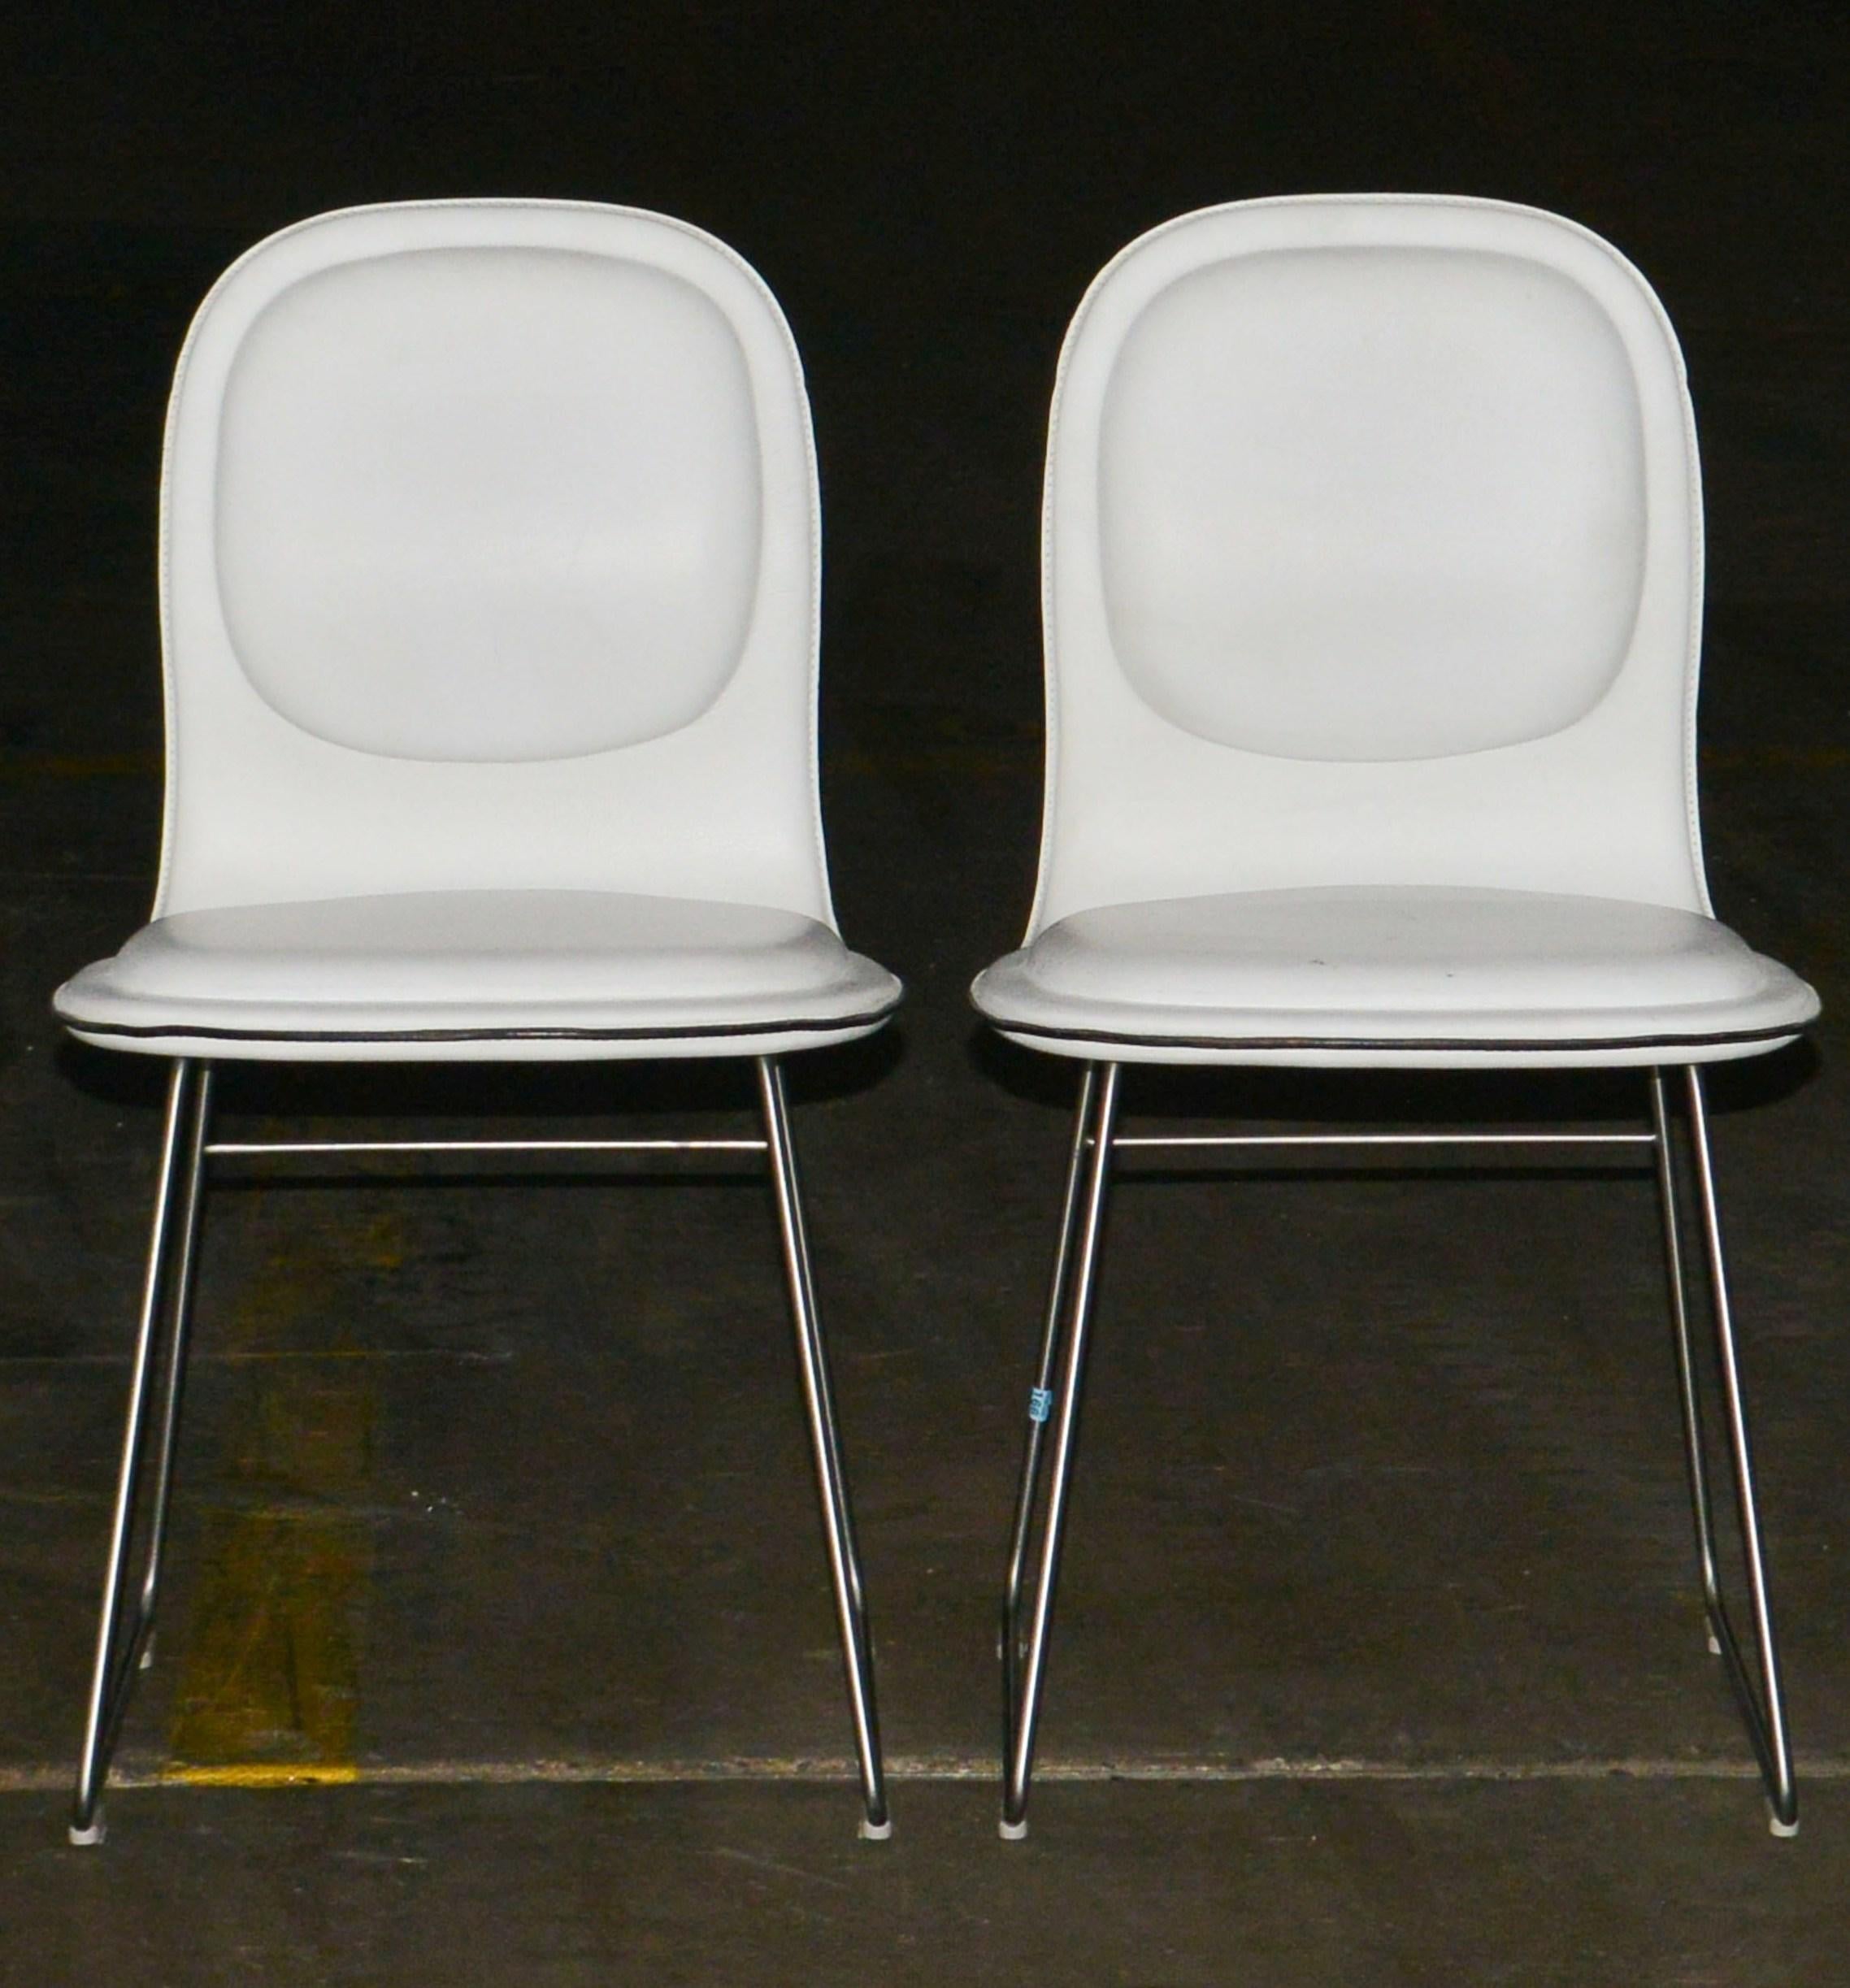 Modern minimalist set of six 'Hi Pad' dining chairs in white leather, by Jasper Morrison for Cappellini. The set is in great vintage condition with age-appropriate wear and use.